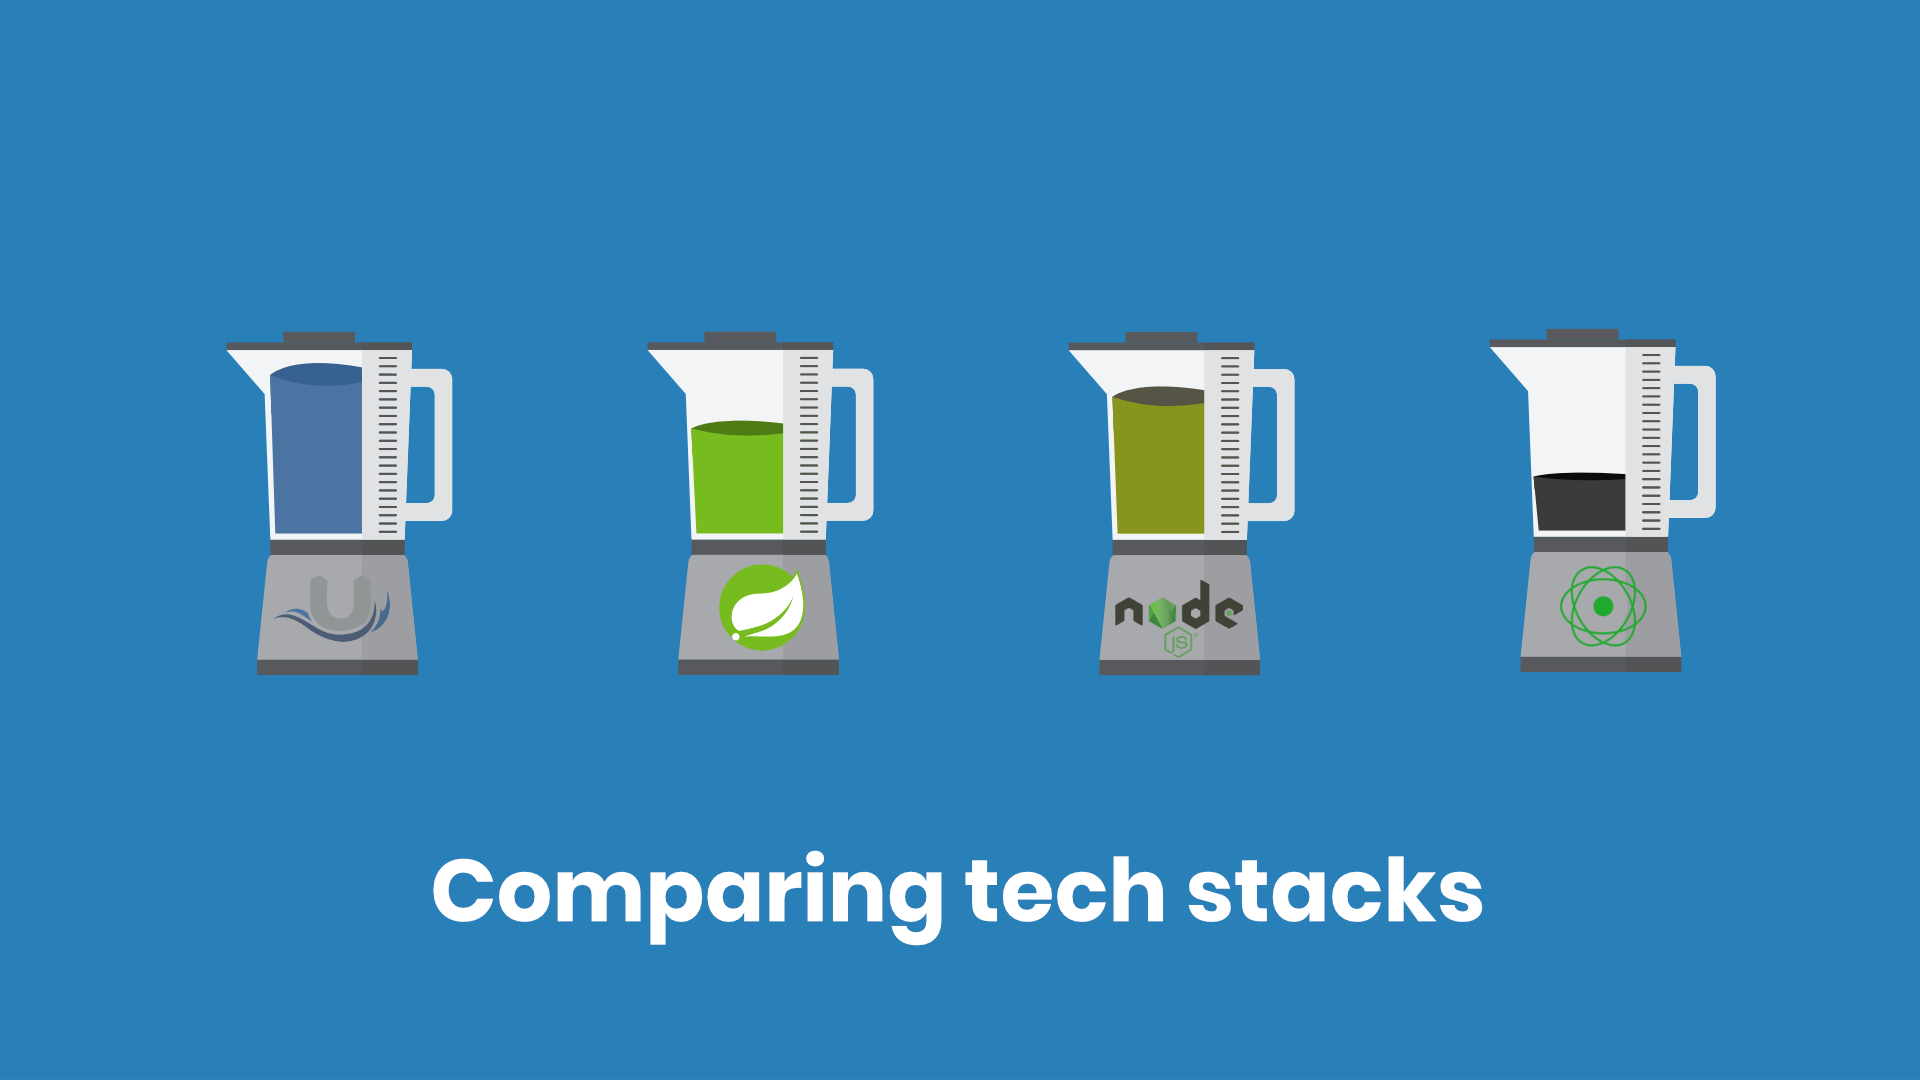 Comparing tech stacks